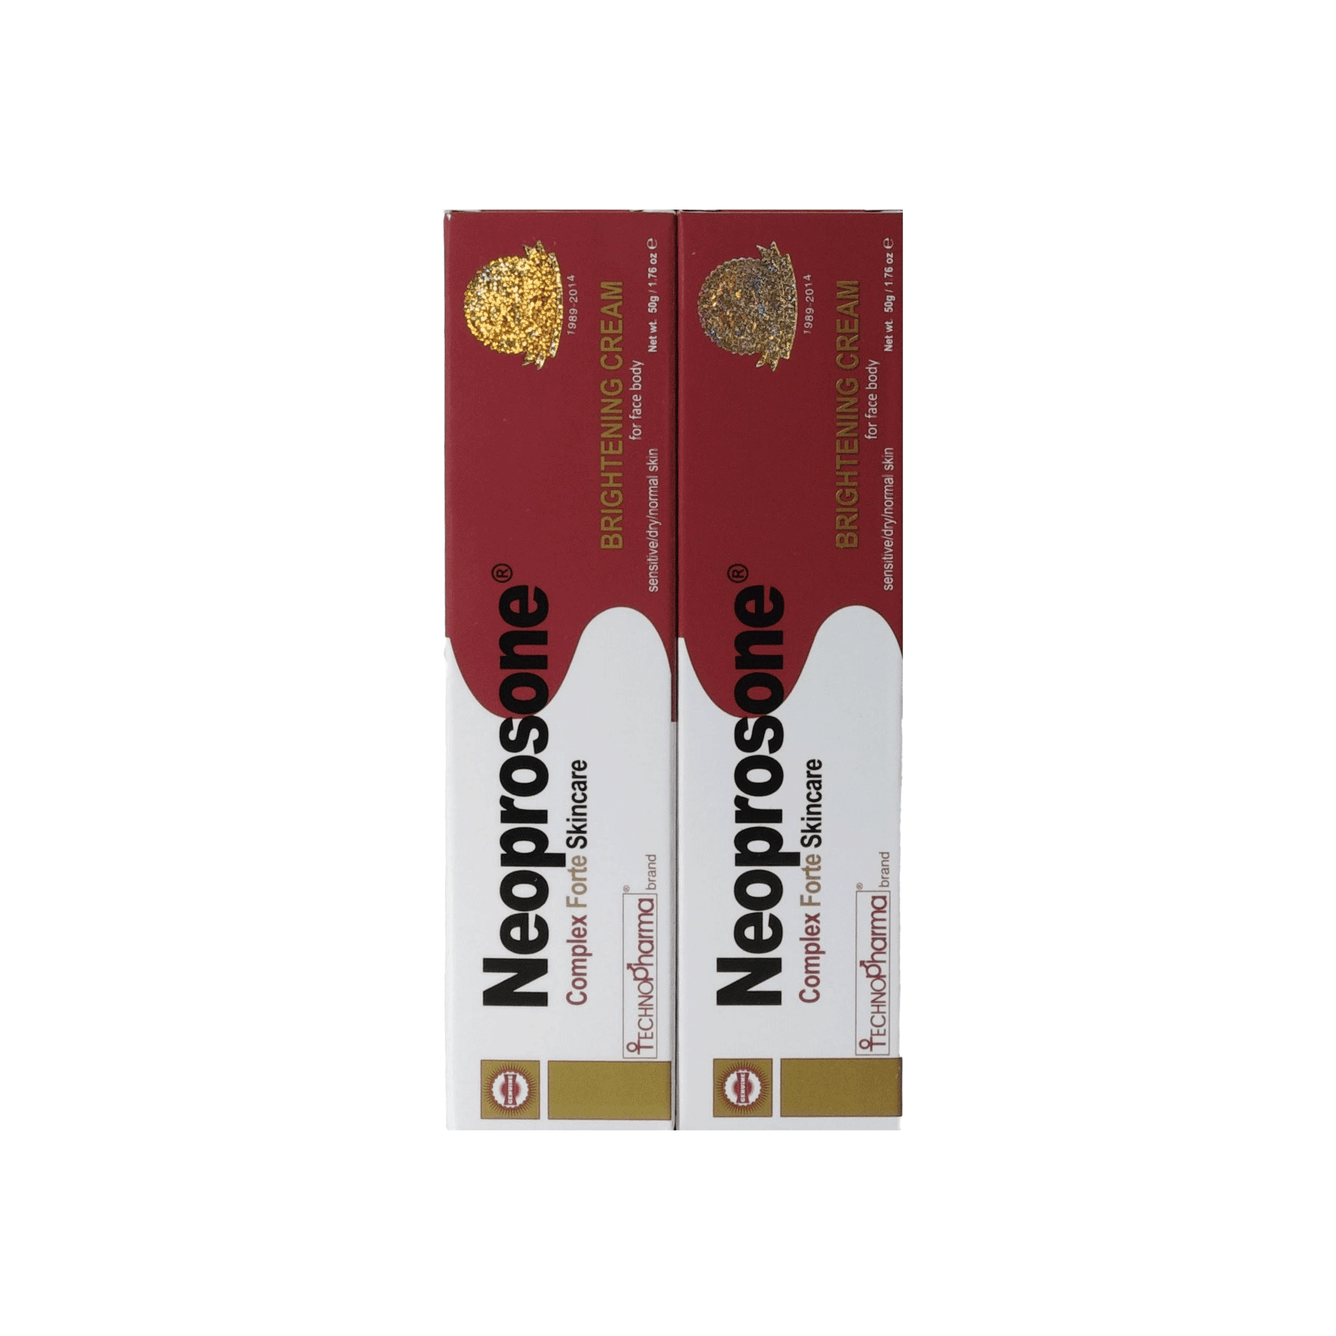 Neoprosone Cream 50gr 12 Pack Mitchell Brands - Mitchell Brands - Skin Lightening, Skin Brightening, Fade Dark Spots, Shea Butter, Hair Growth Products